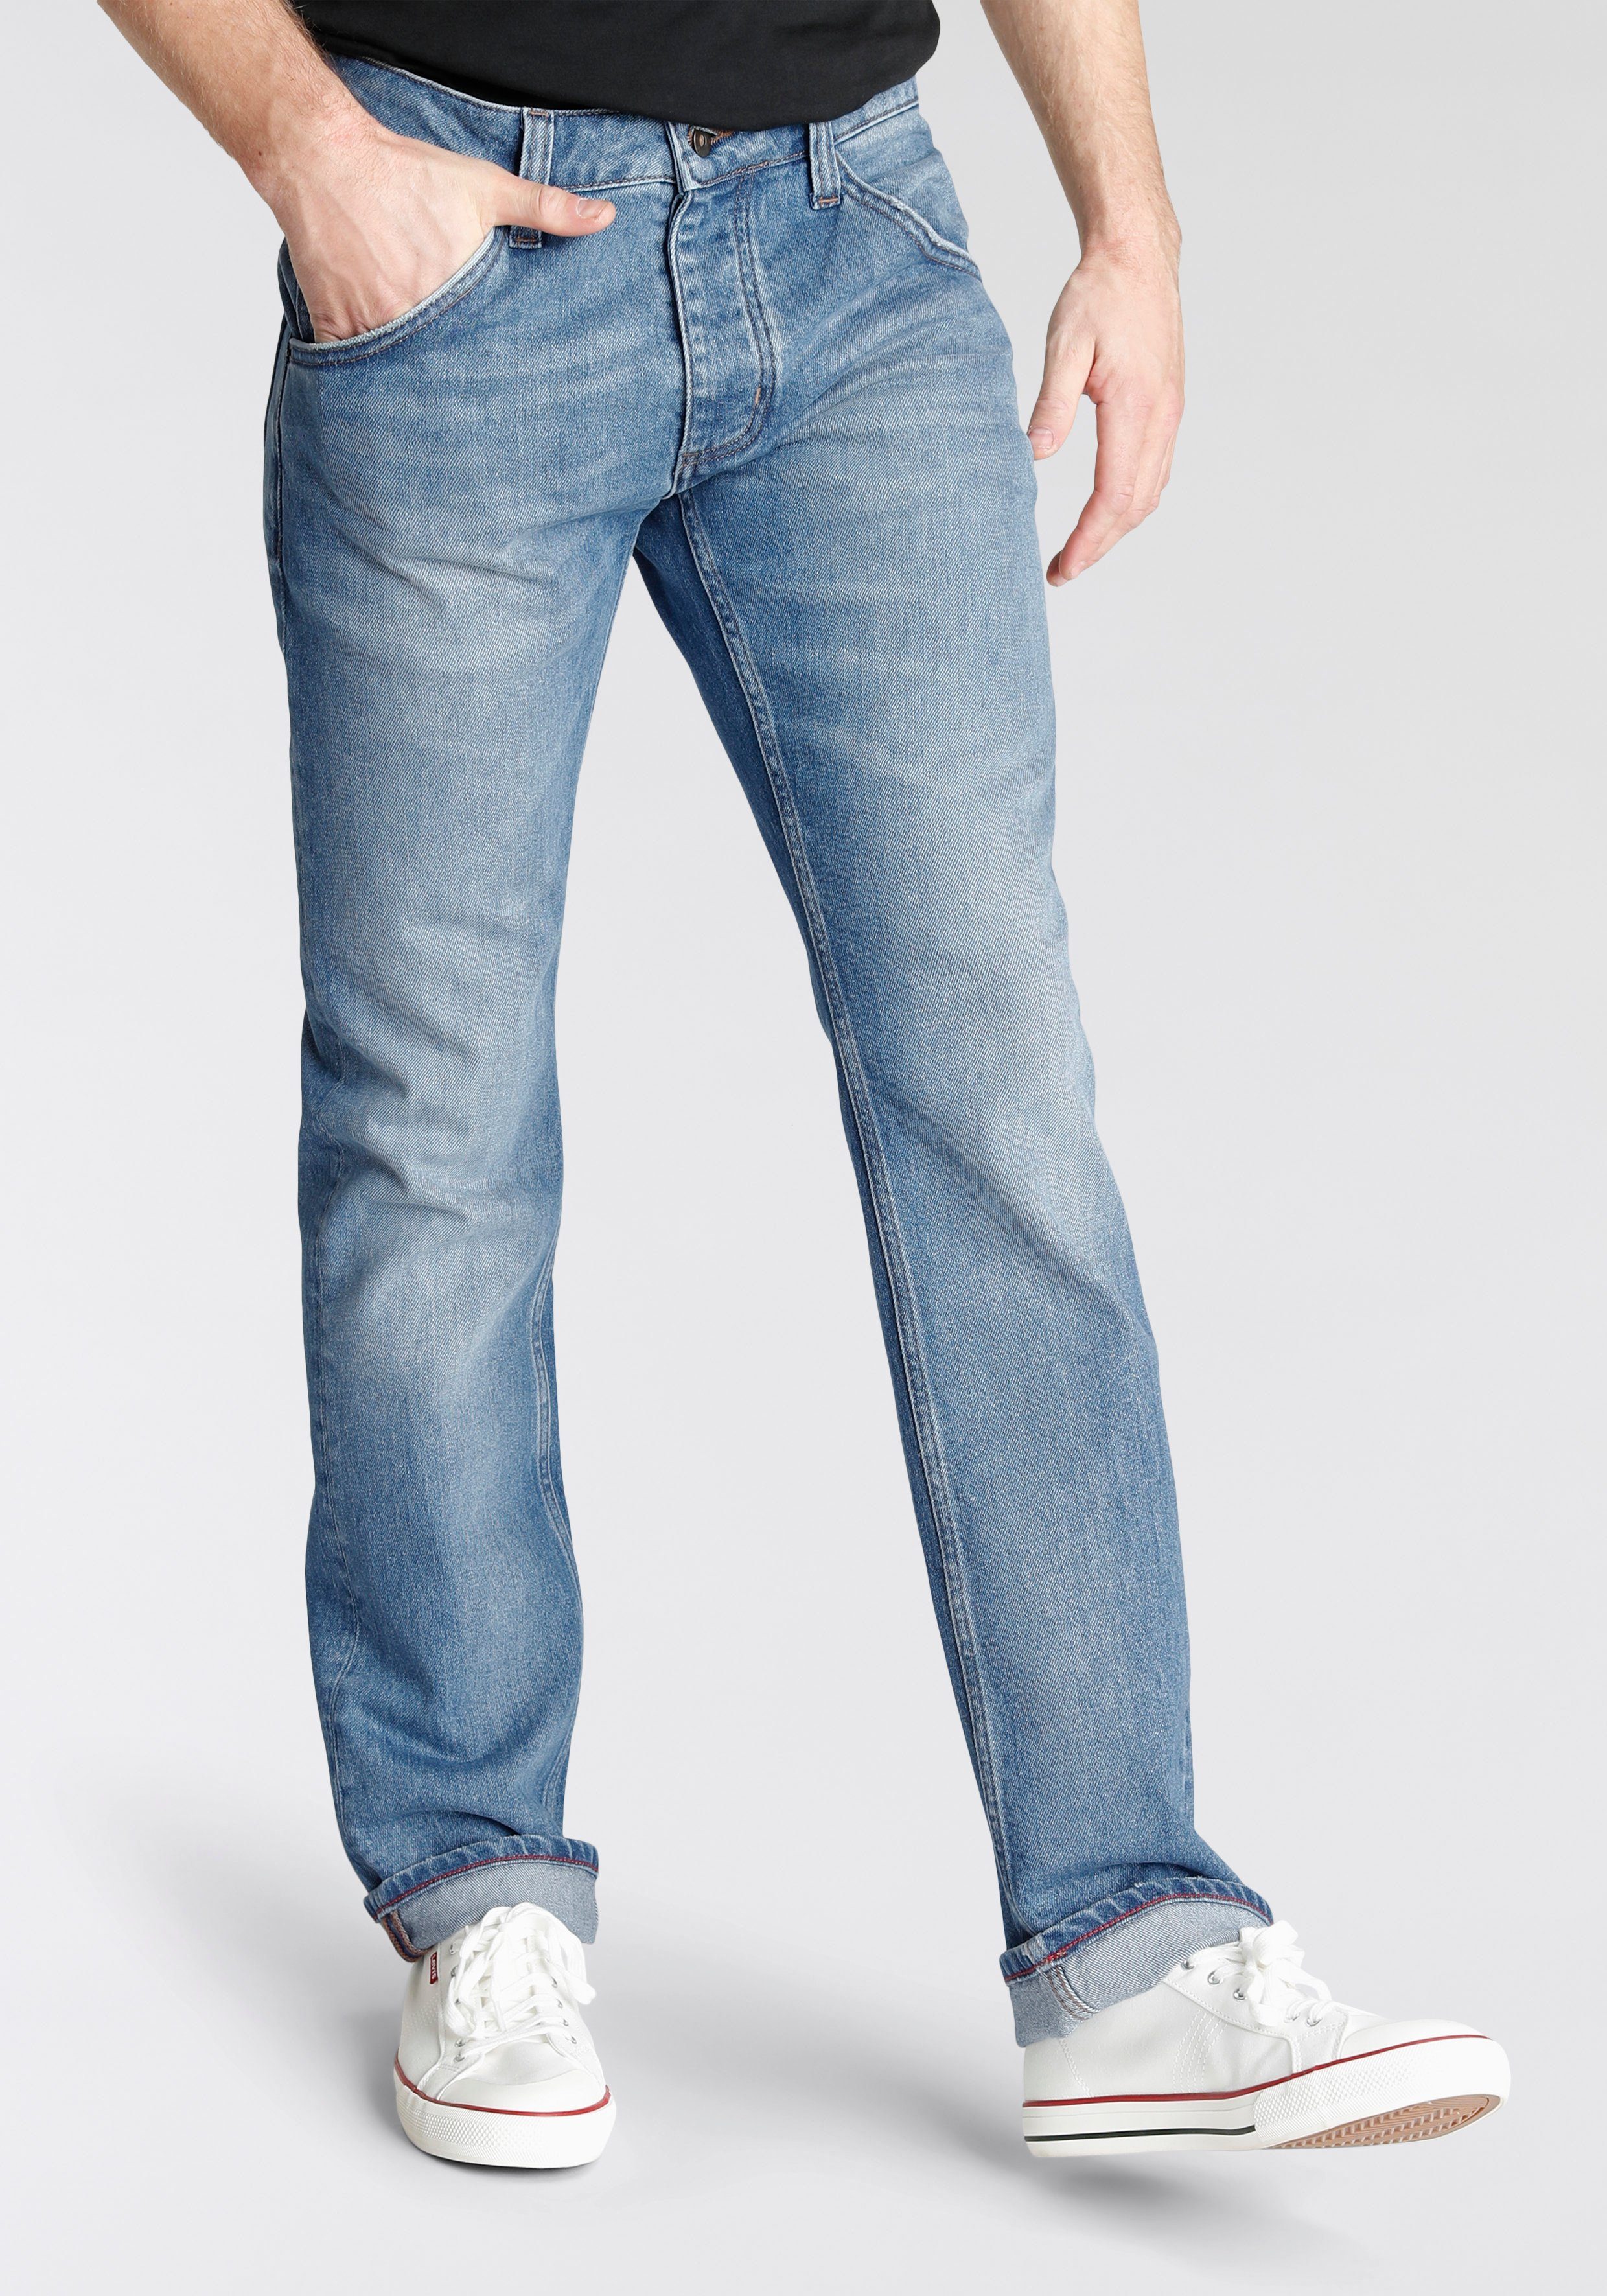 STRAIGHT in Leibhöhe niedrigere Straight-Jeans STYLE 5-Pocket-Form, Bein, MUSTANG MICHIGAN Gerades